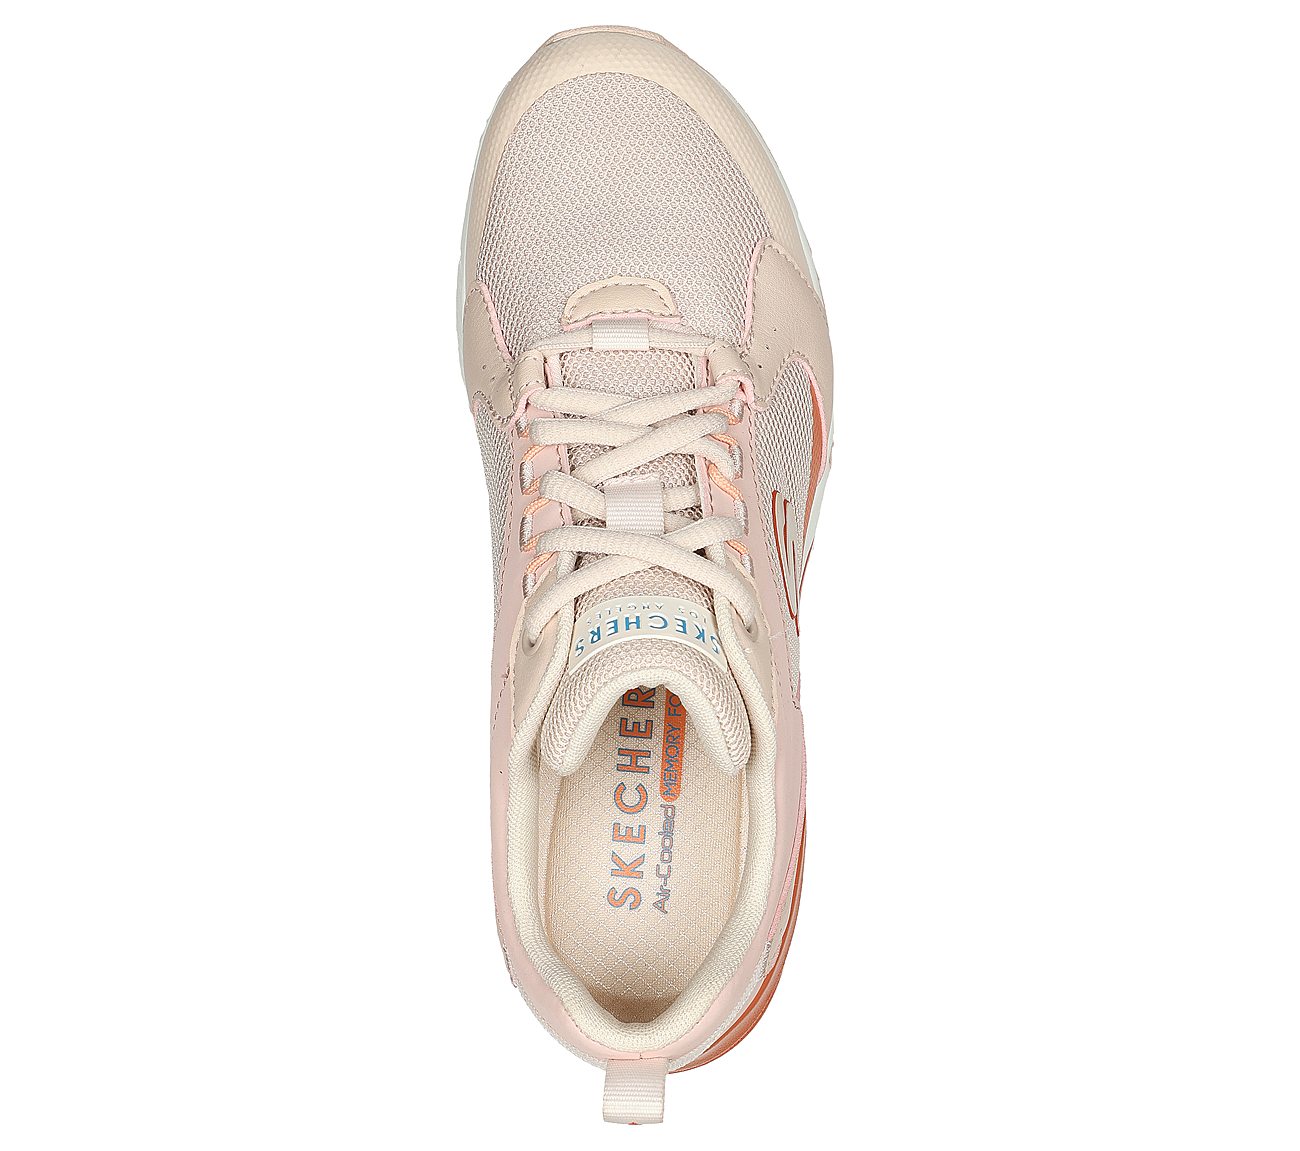 UNO 2 - 90'S 2, LLLIGHT PINK Footwear Top View